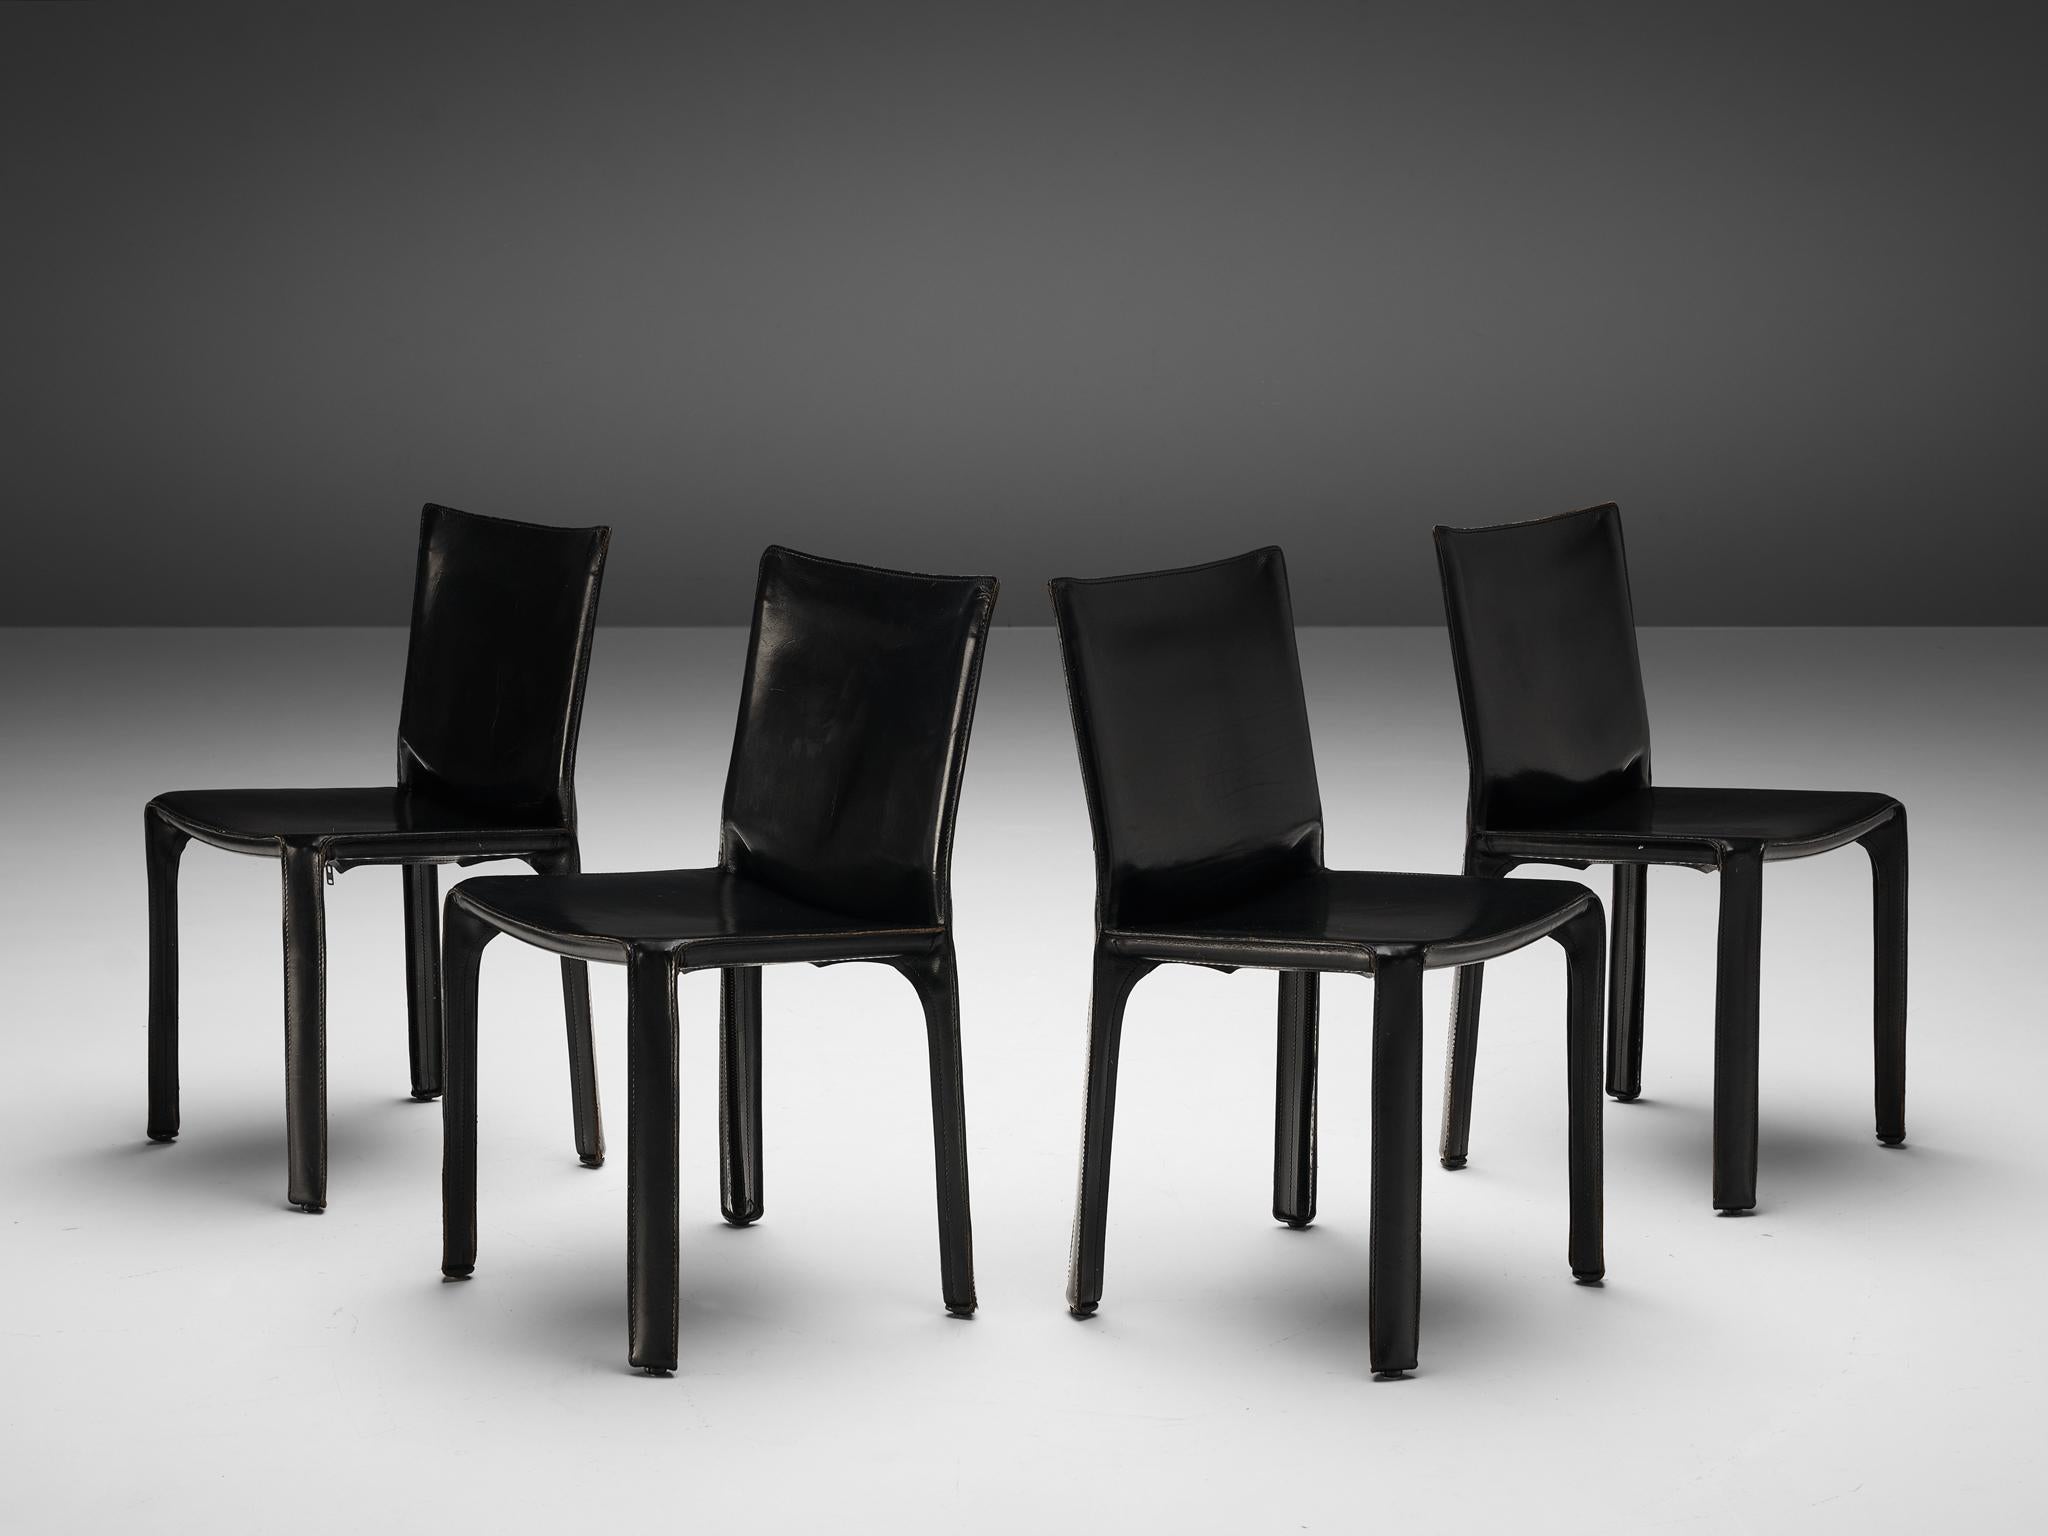 Mario Bellini for Cassina, set of four 'cab' dining chairs model 412, black leather, Italy, 1976

Conceptually, the chair was designed to become marked and shaped over time by its user. The leather skin fits like a glove over the steel skeleton and